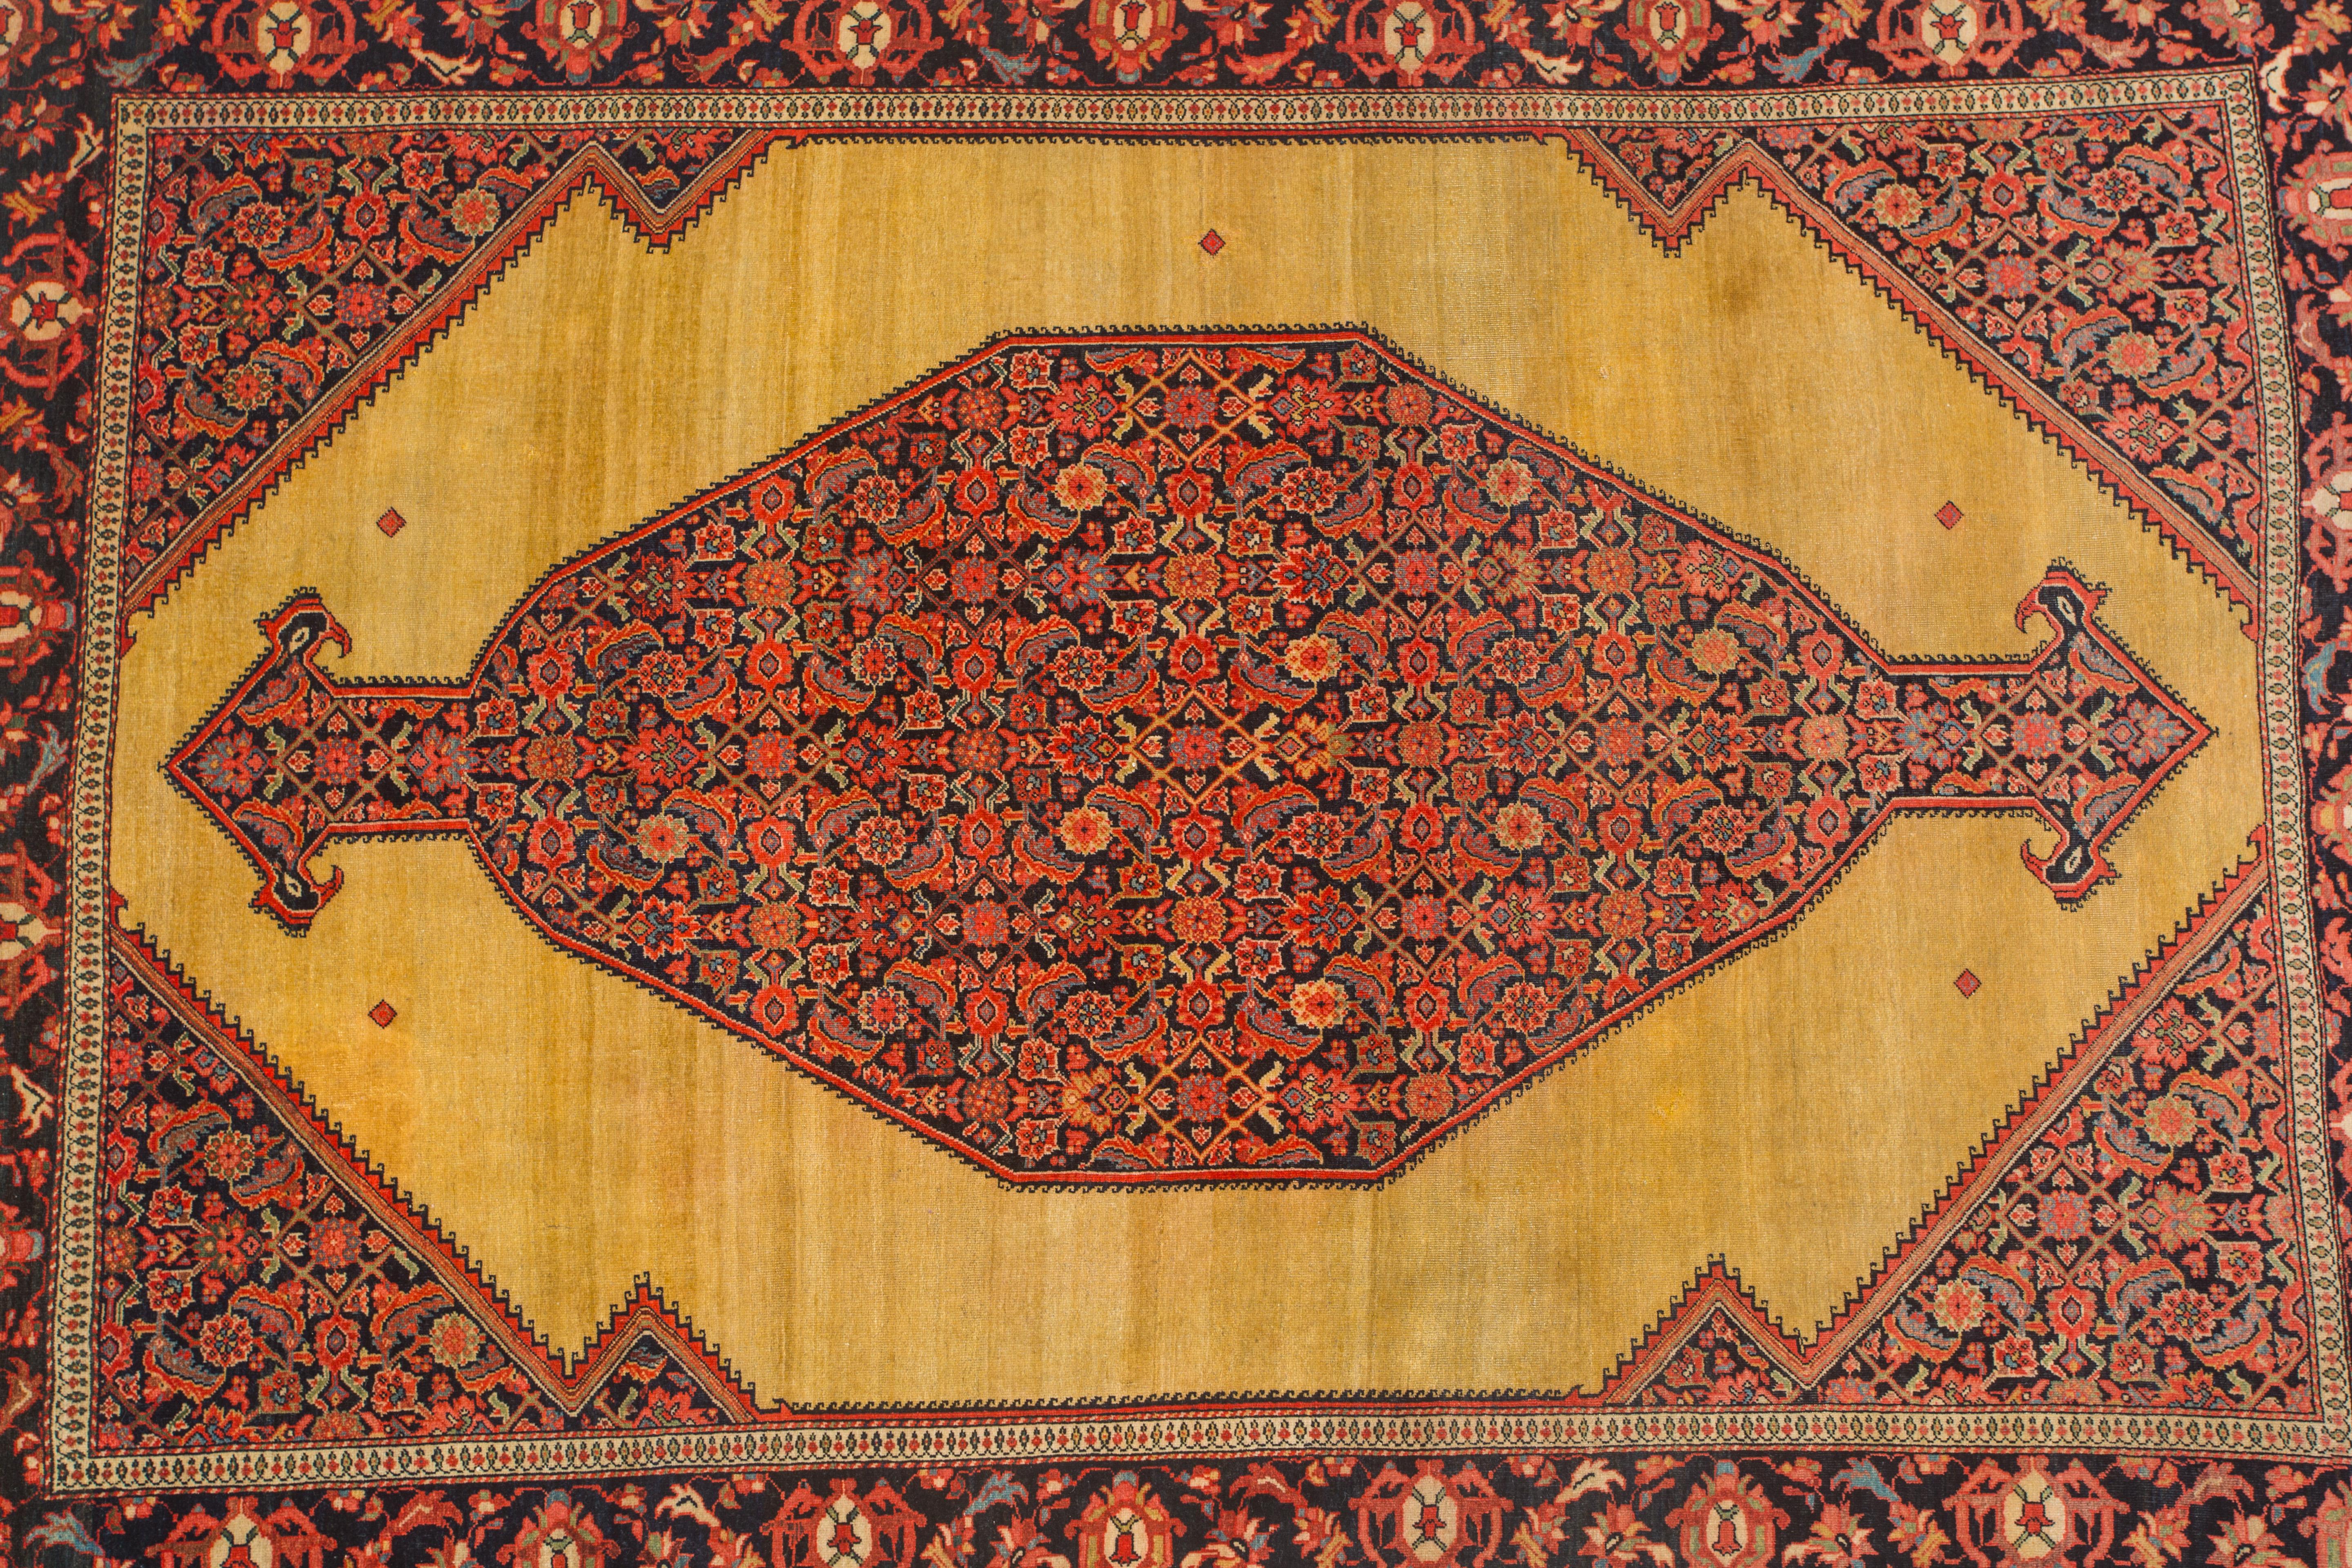 Ferahan Sarouk Museum Quality
MUSEUM QUALITY Ferahan Sarouk, third quarter 19th century 
6.6 x 4.5 feet 

From a USA collector

Ferahan Sarouk carpets produced around the wider Arak (formerly Sultanabad) area from about 1850-1910 earned a